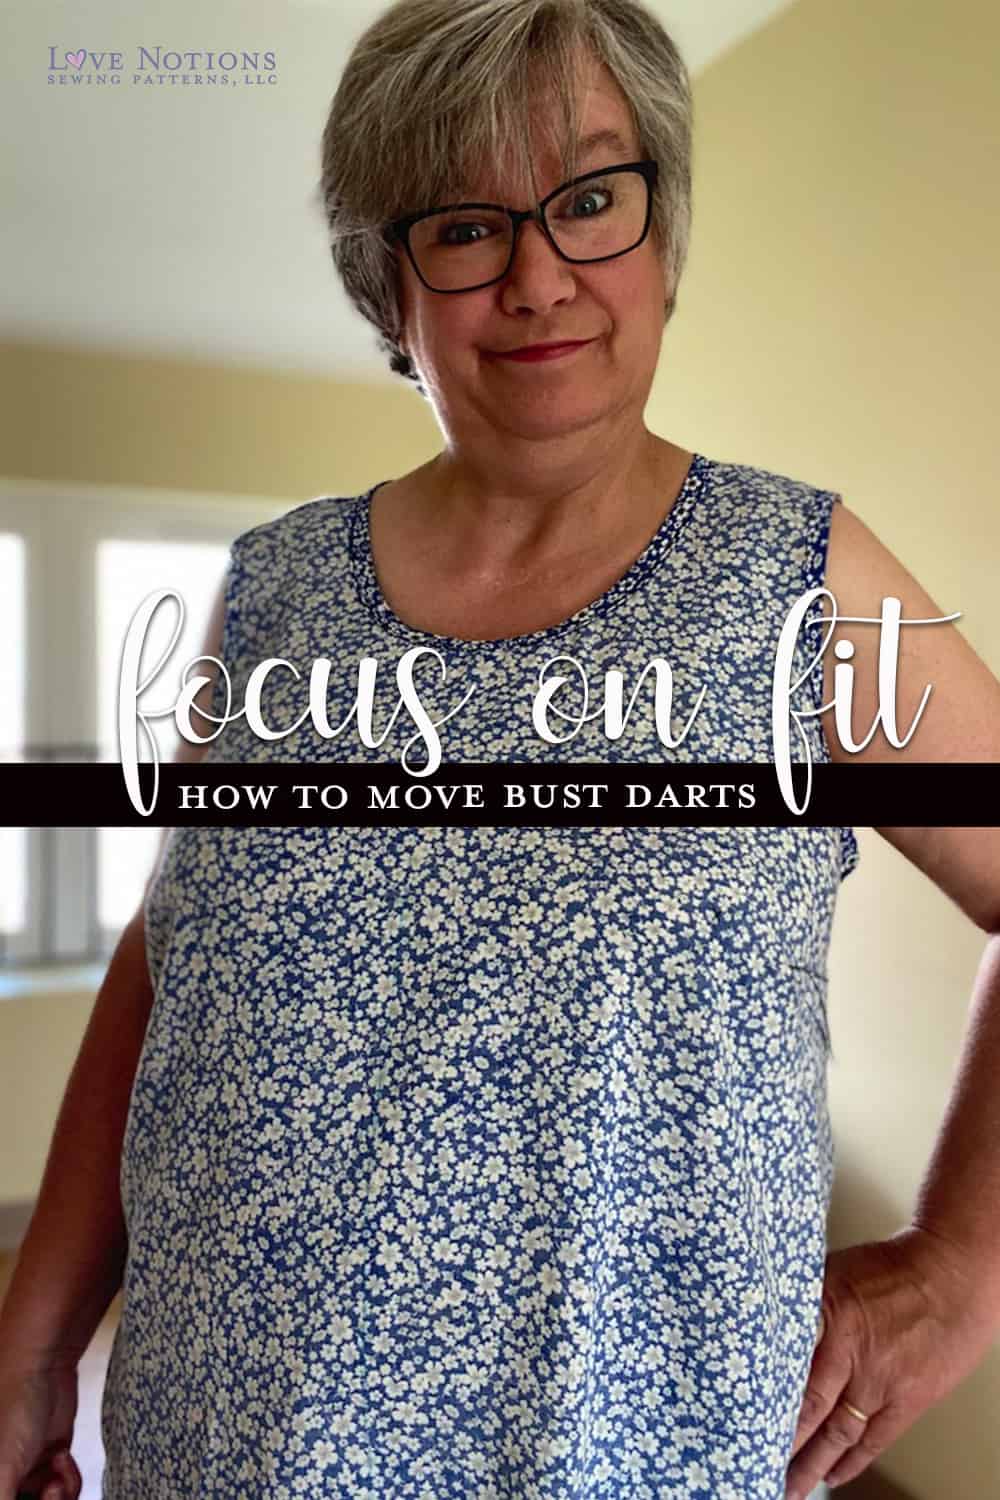 How to move a bust dart - Focus on Fit - Love Notions Sewing Patterns